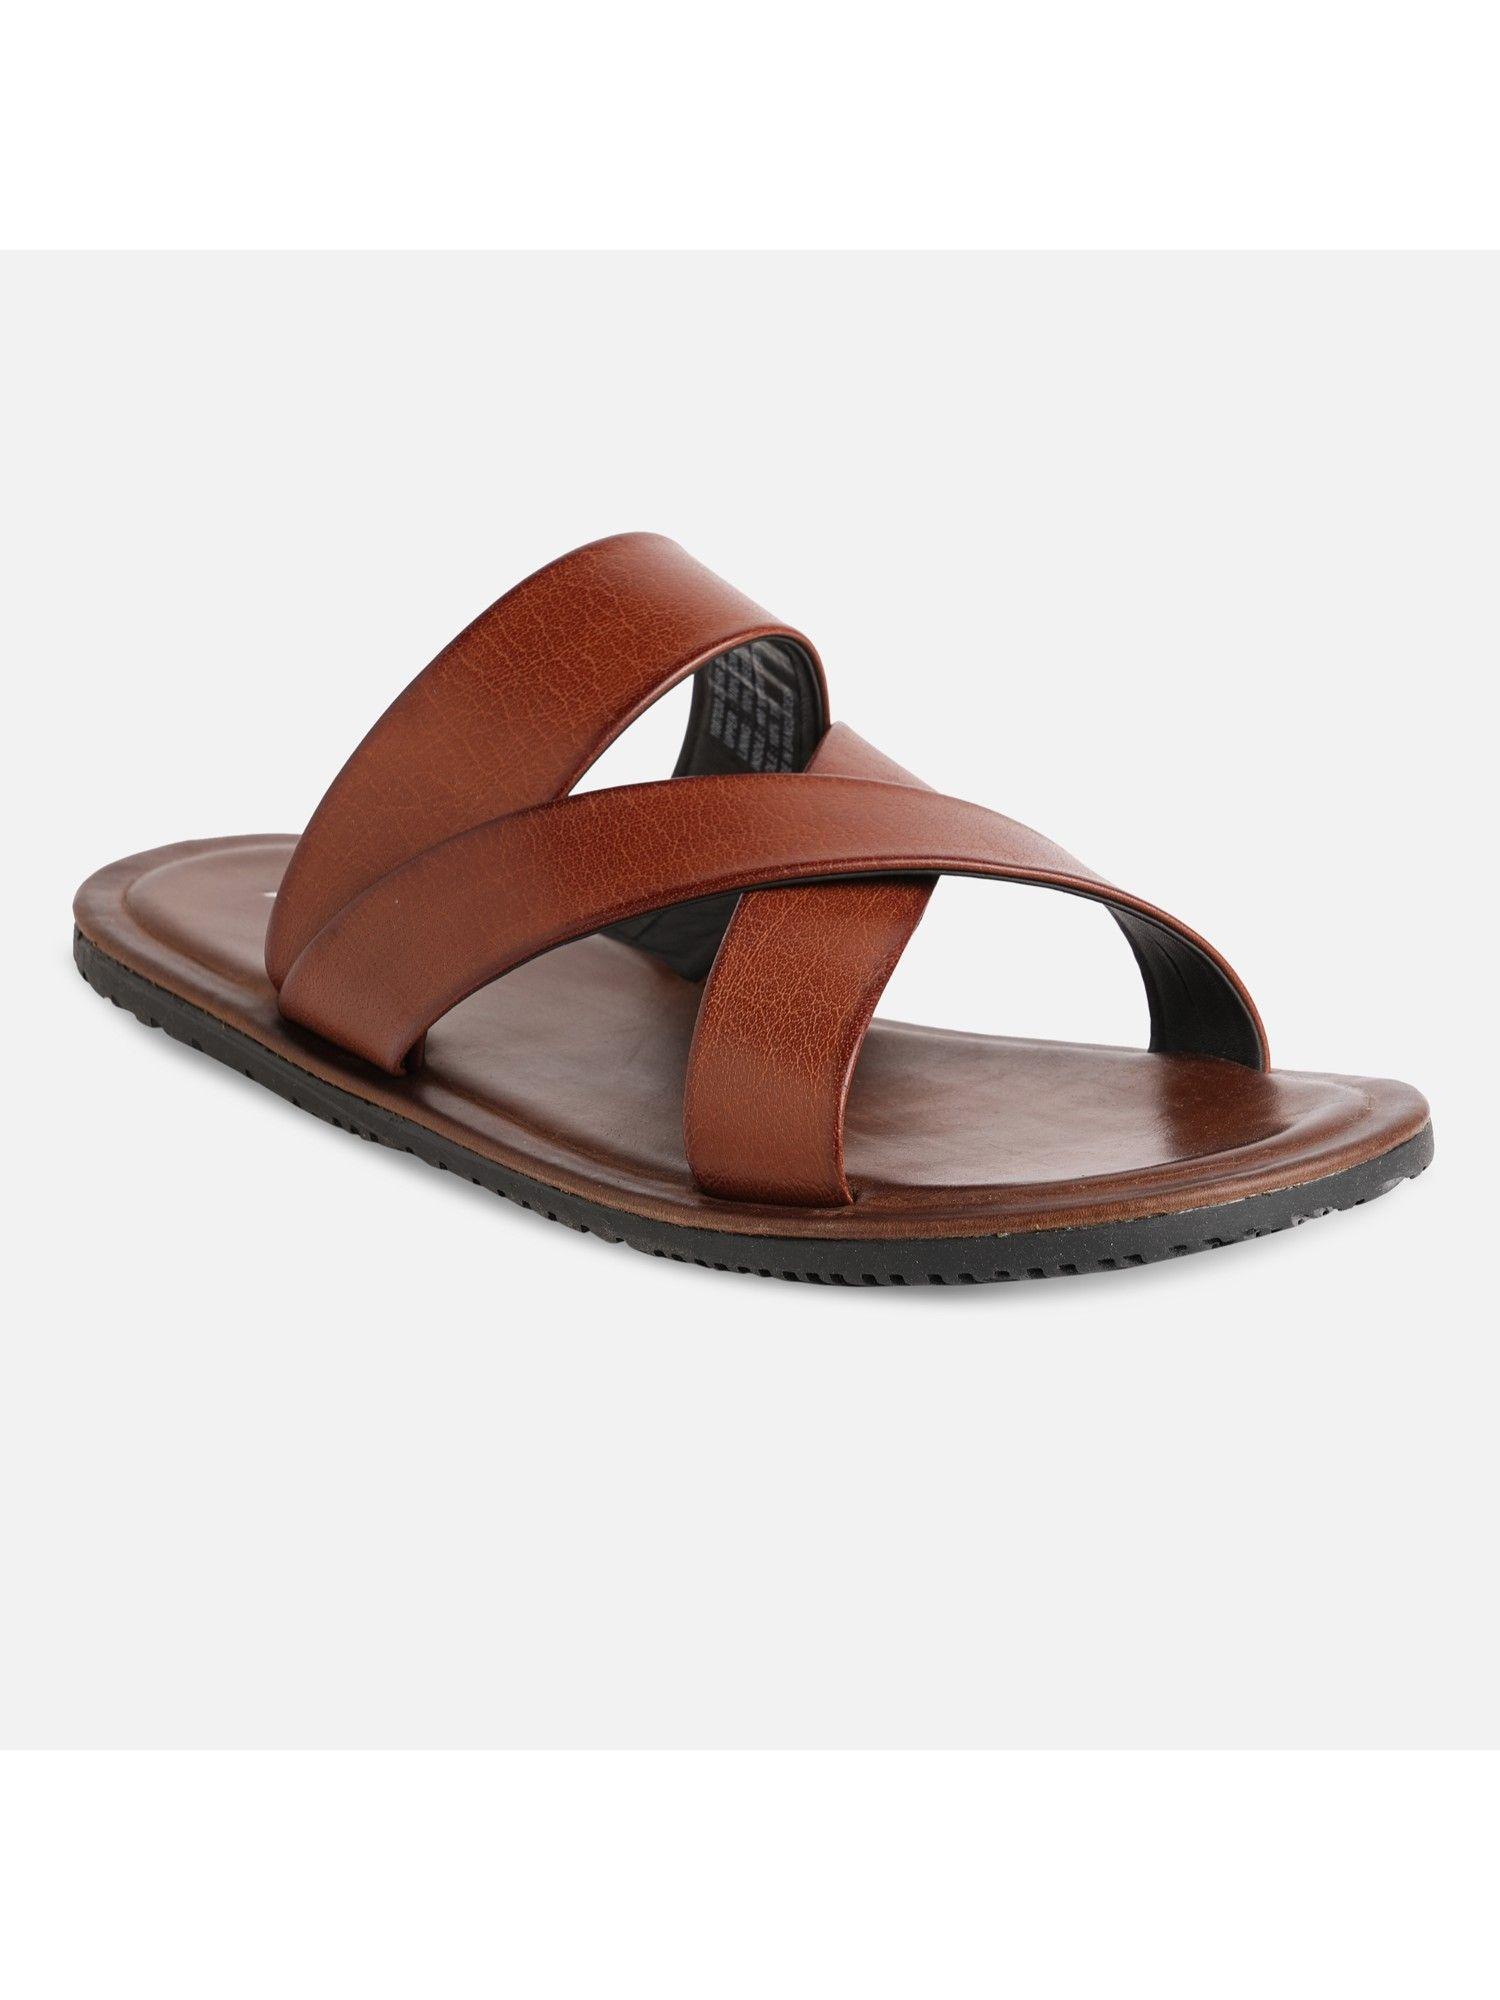 zahir-leather-tan-solid-sandals